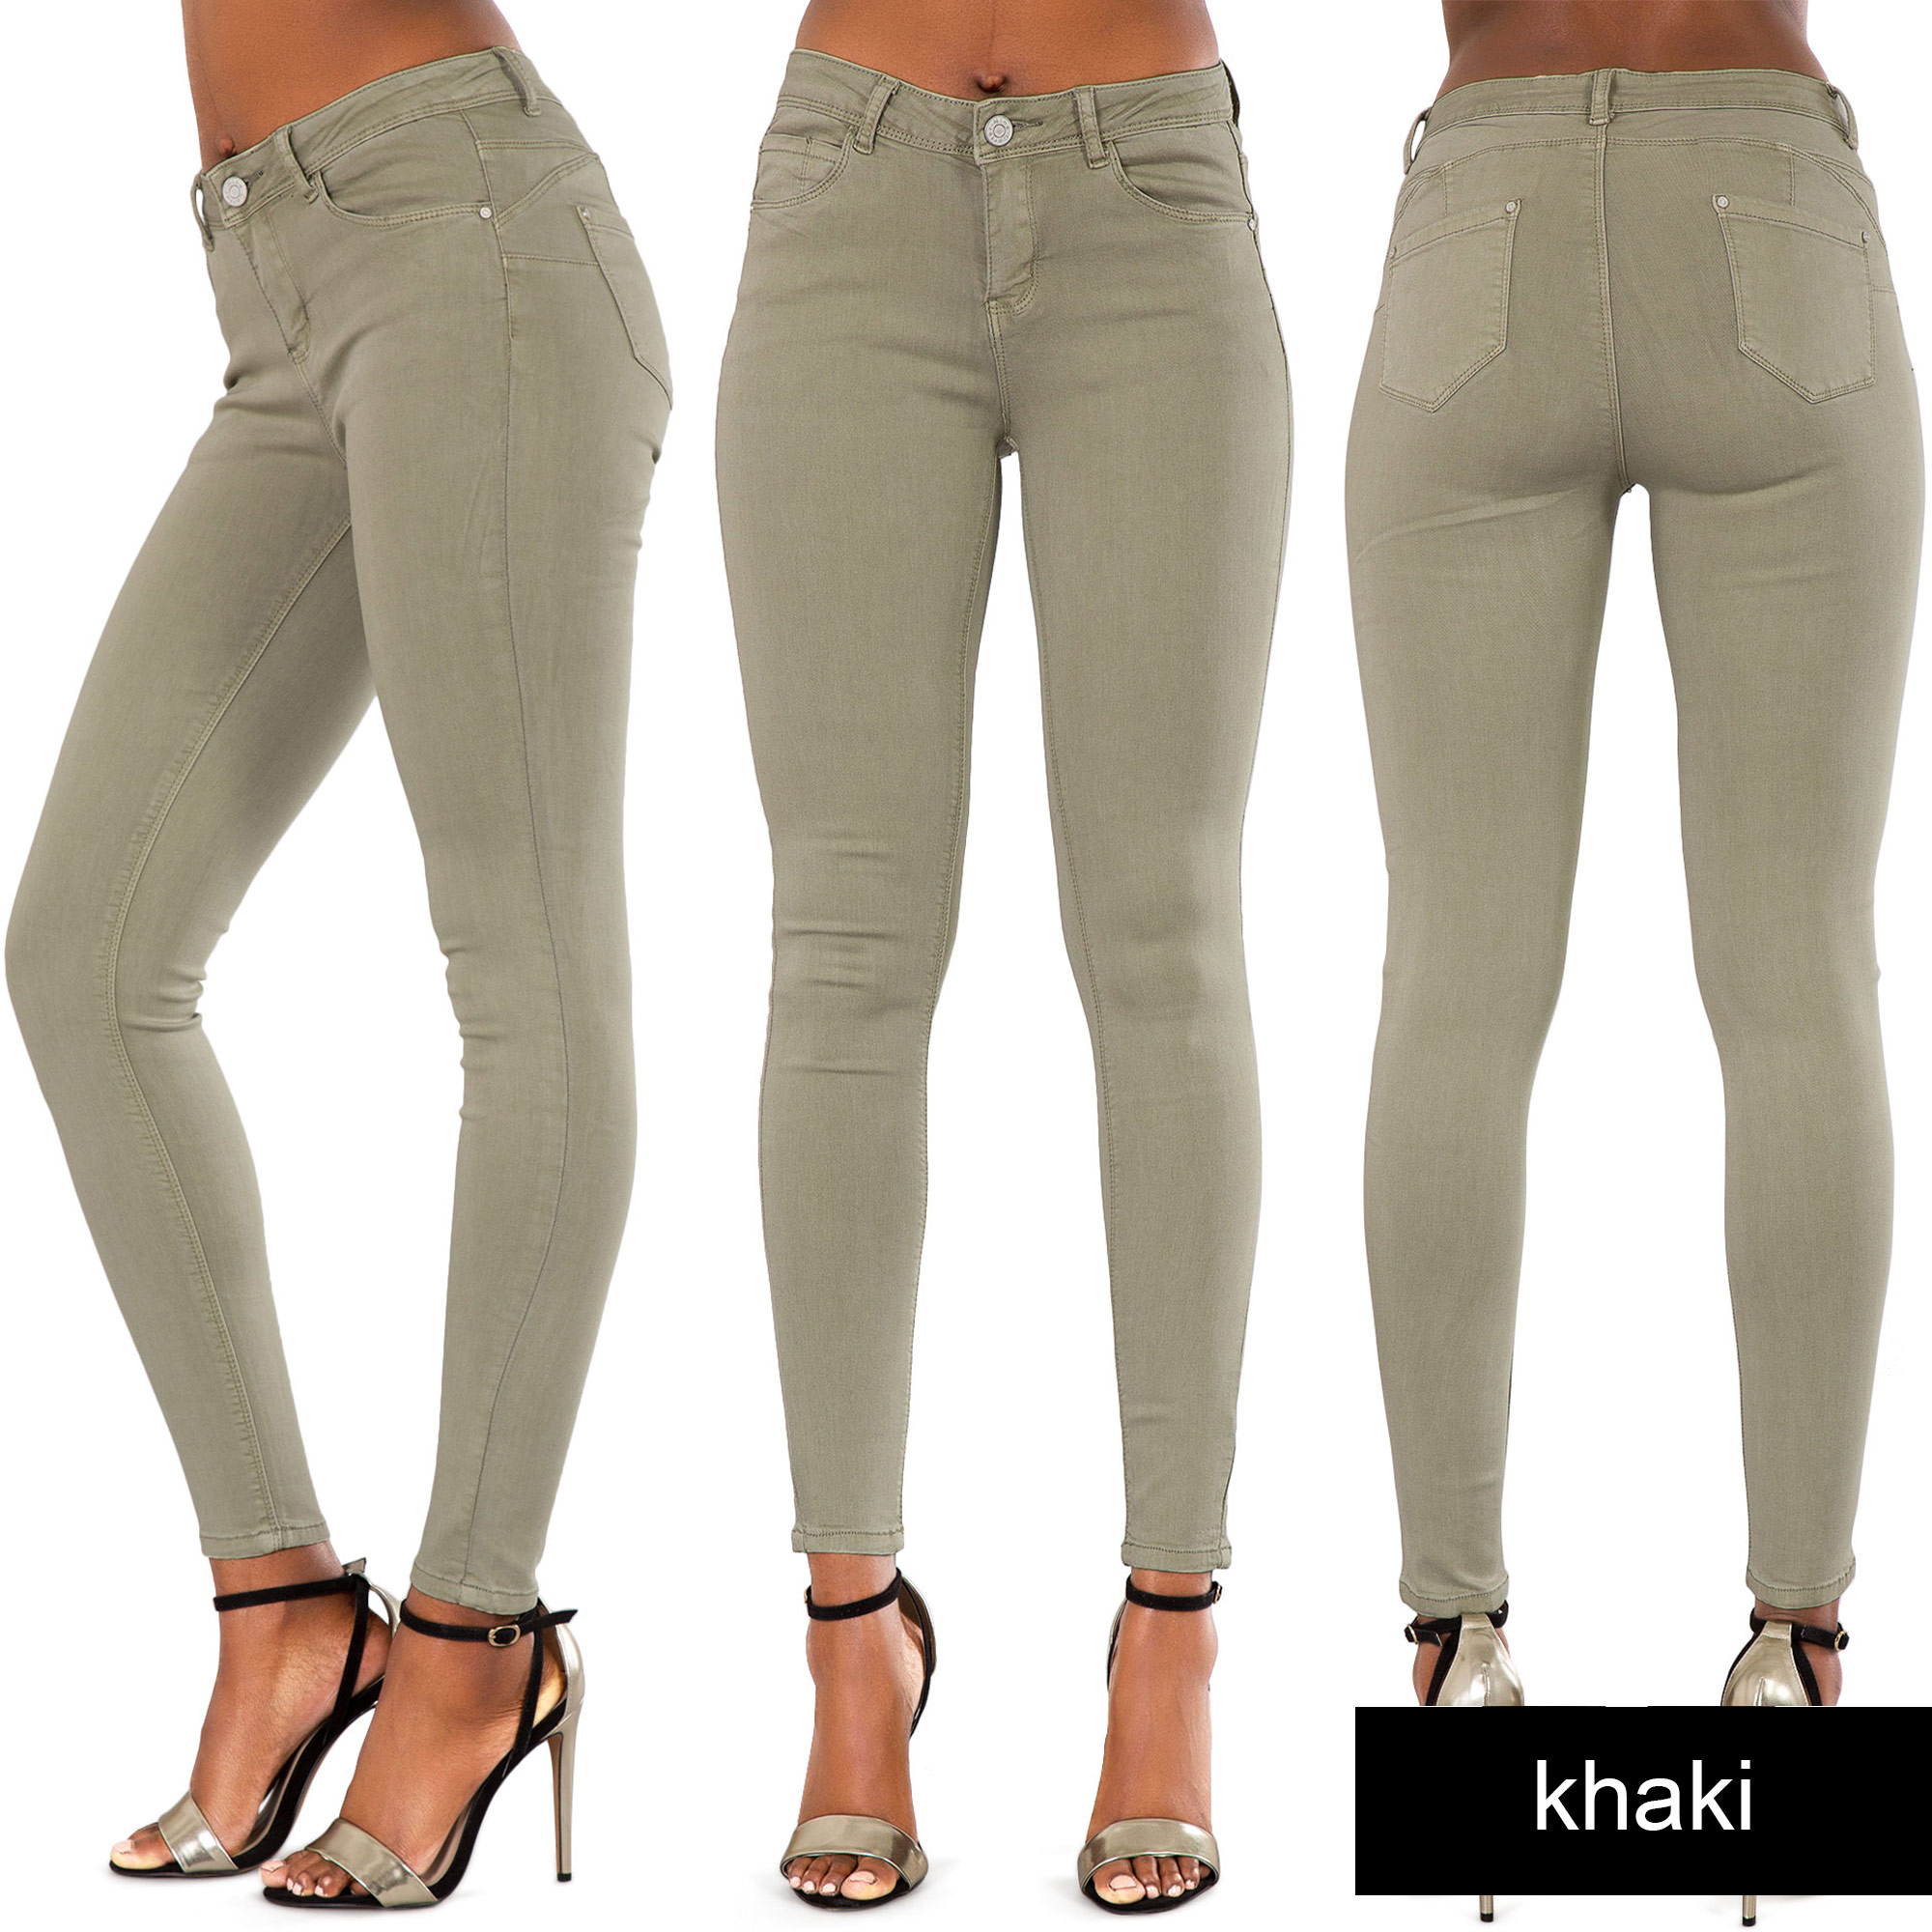 New Women 7 Colour High Waist Pants Skinny Fit Jeans Stretchy Trousers ...